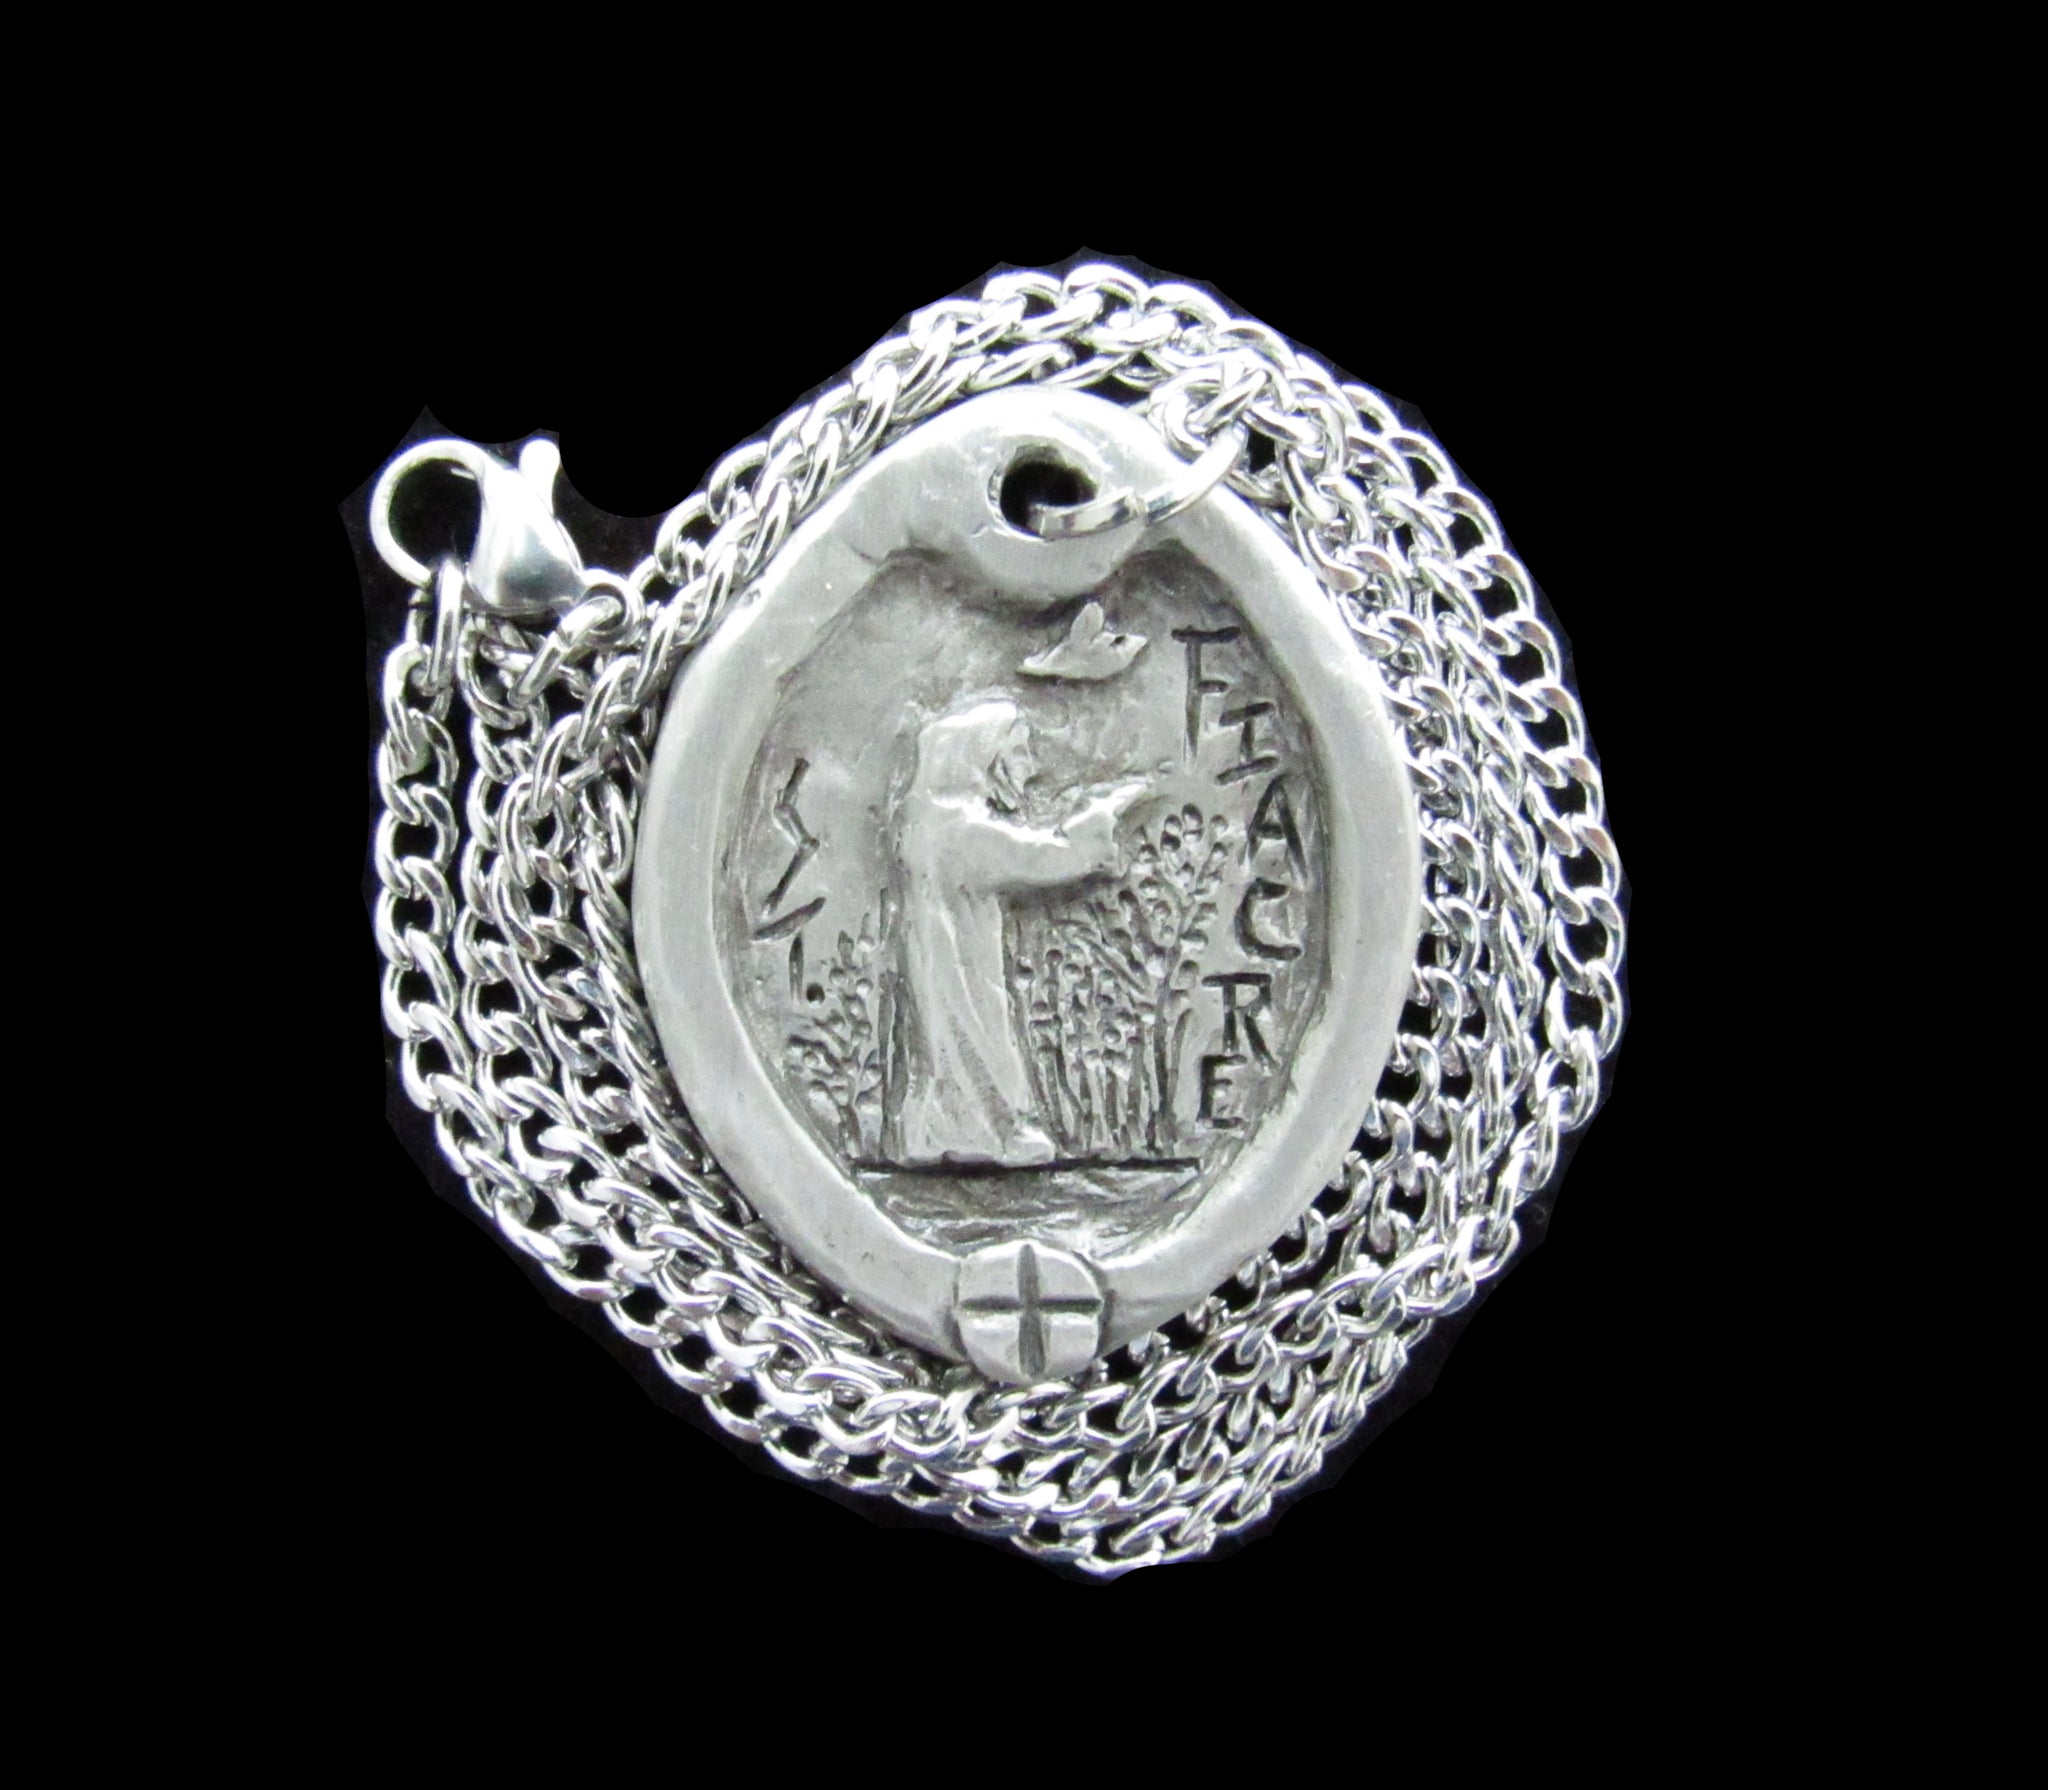 Handmade Medal on Chain of St. Fiacre: Patron of Gardeners